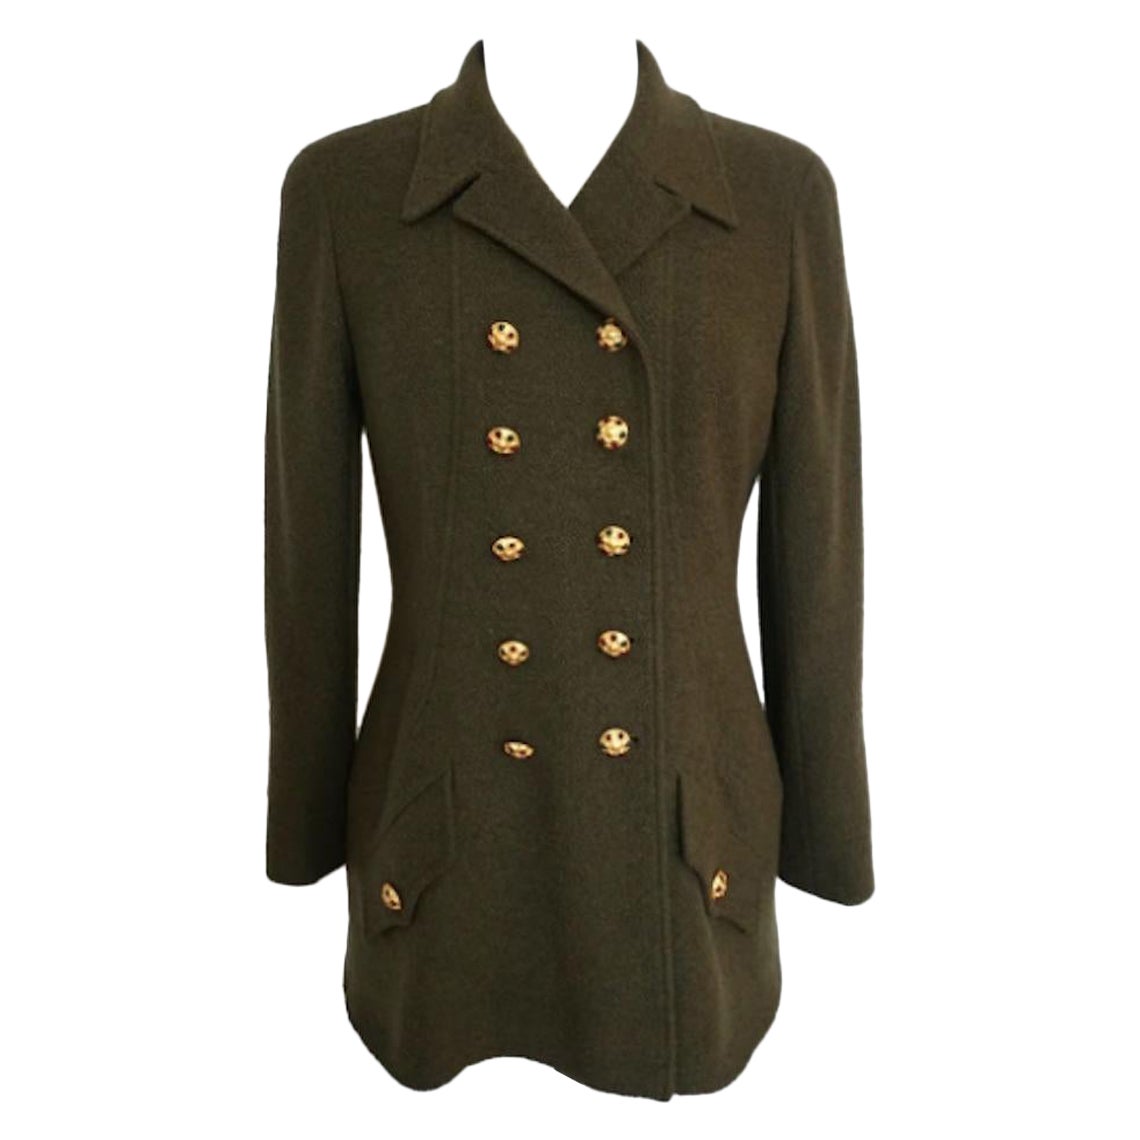 Chanel Fall 1996 Olive Green Jacket with Gripoix Buttons